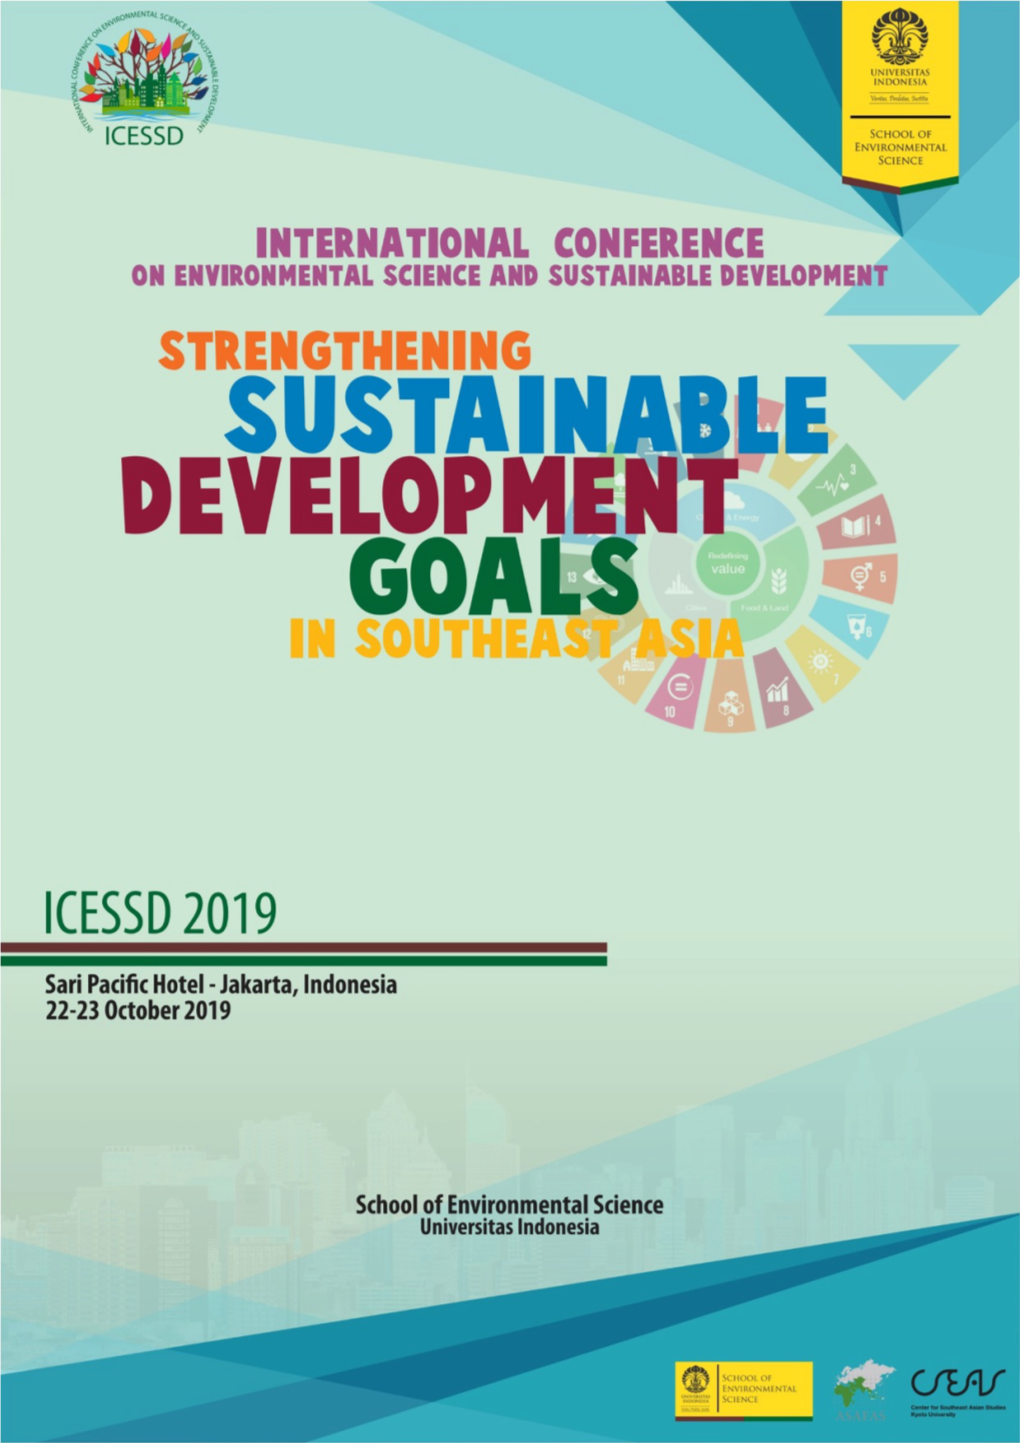 International Conference on Environmental Science and Sustainable Development